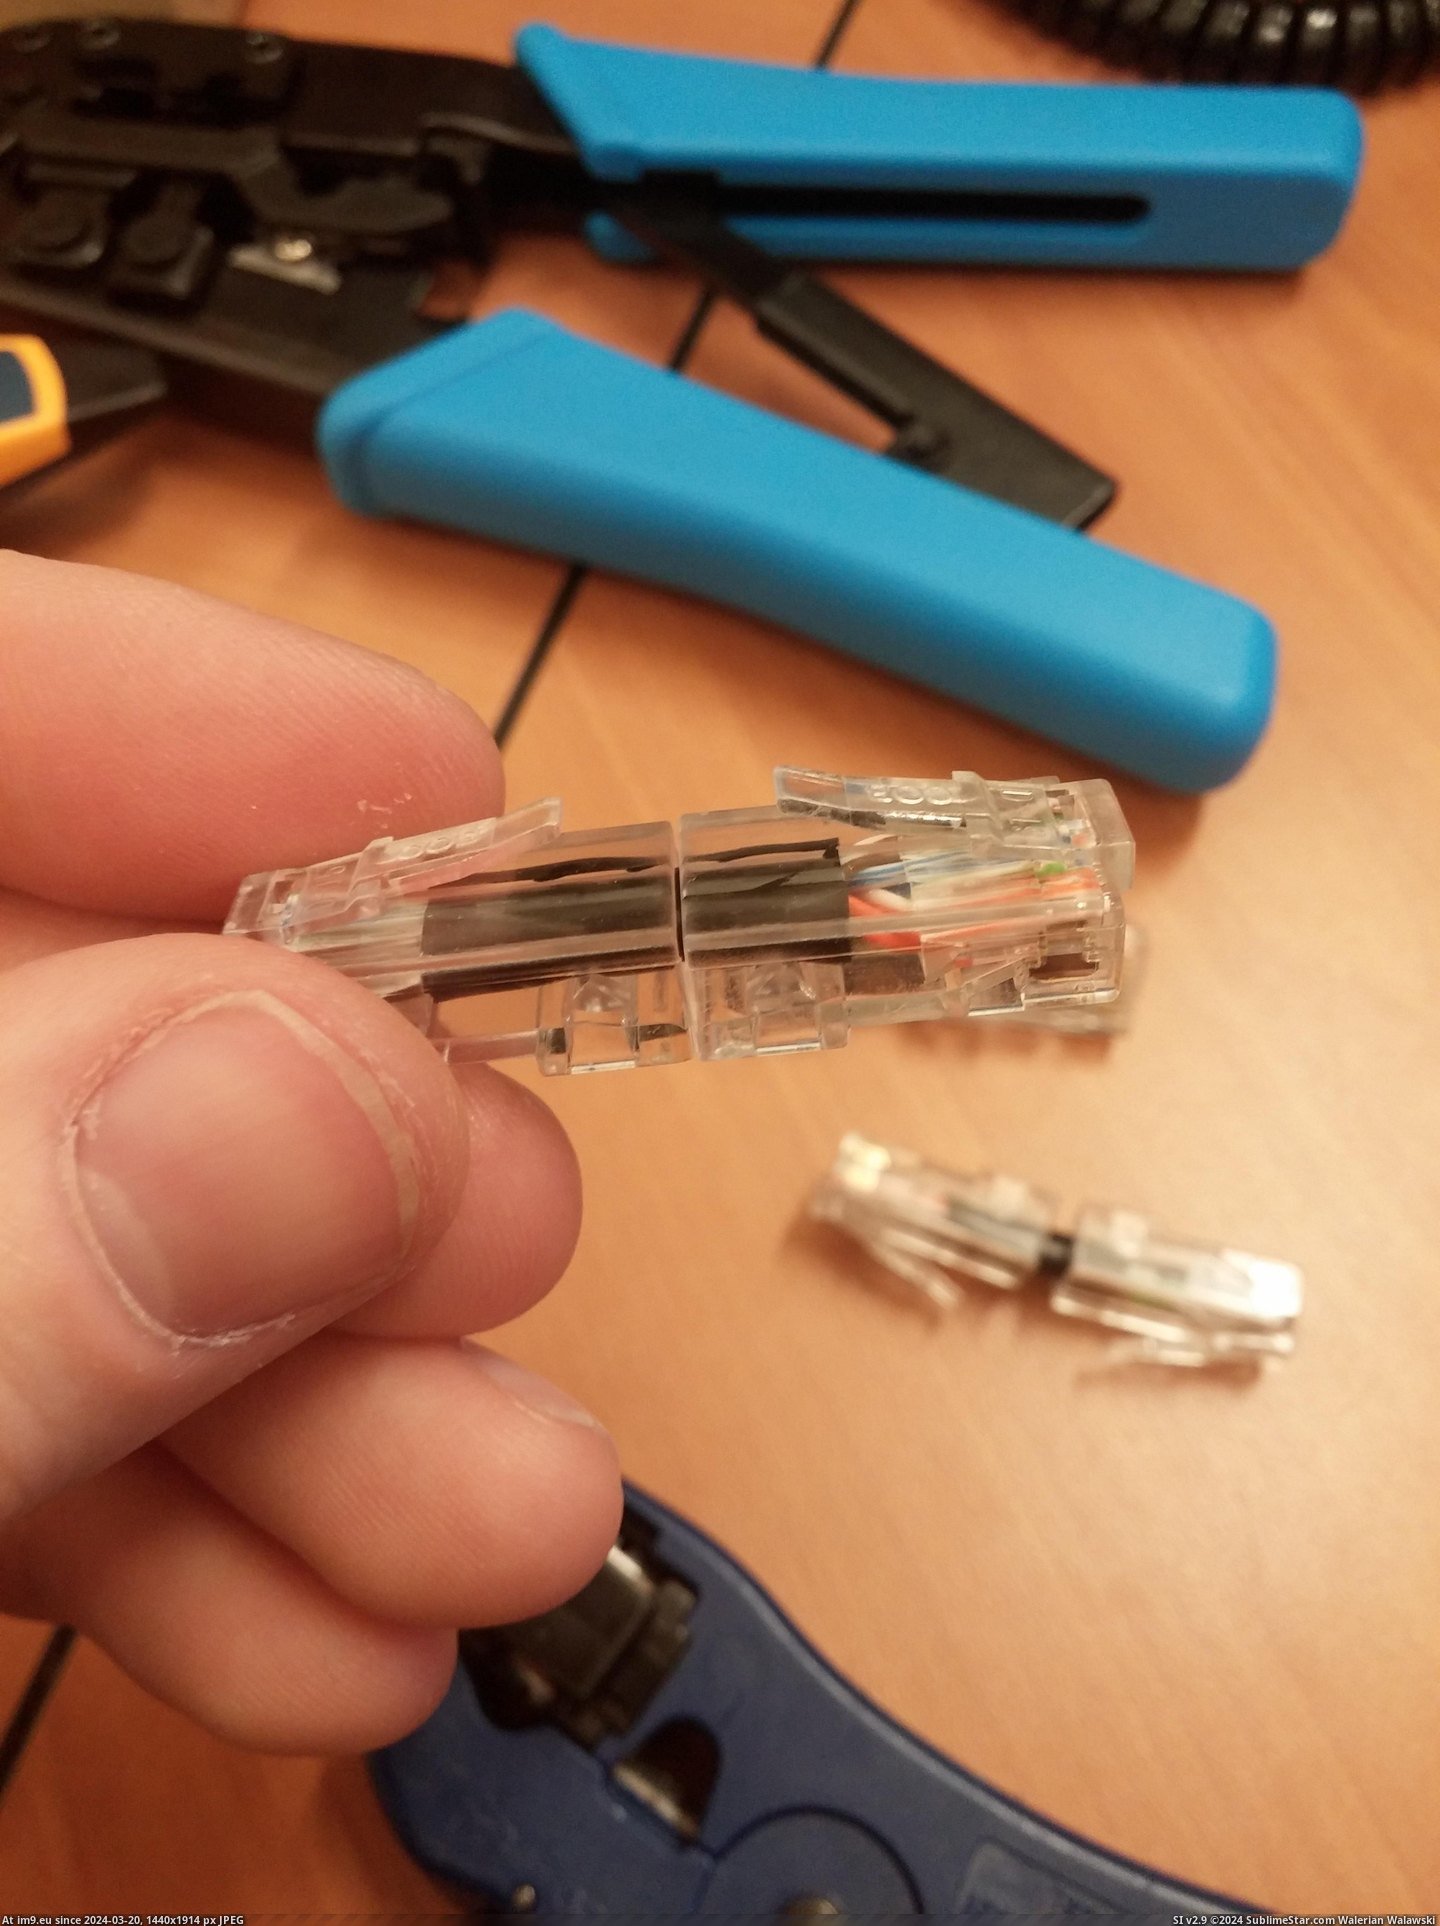 #Network #Smallest #Cable [Pics] 'Give me the smallest network cable' they said... Pic. (Image of album My r/PICS favs))